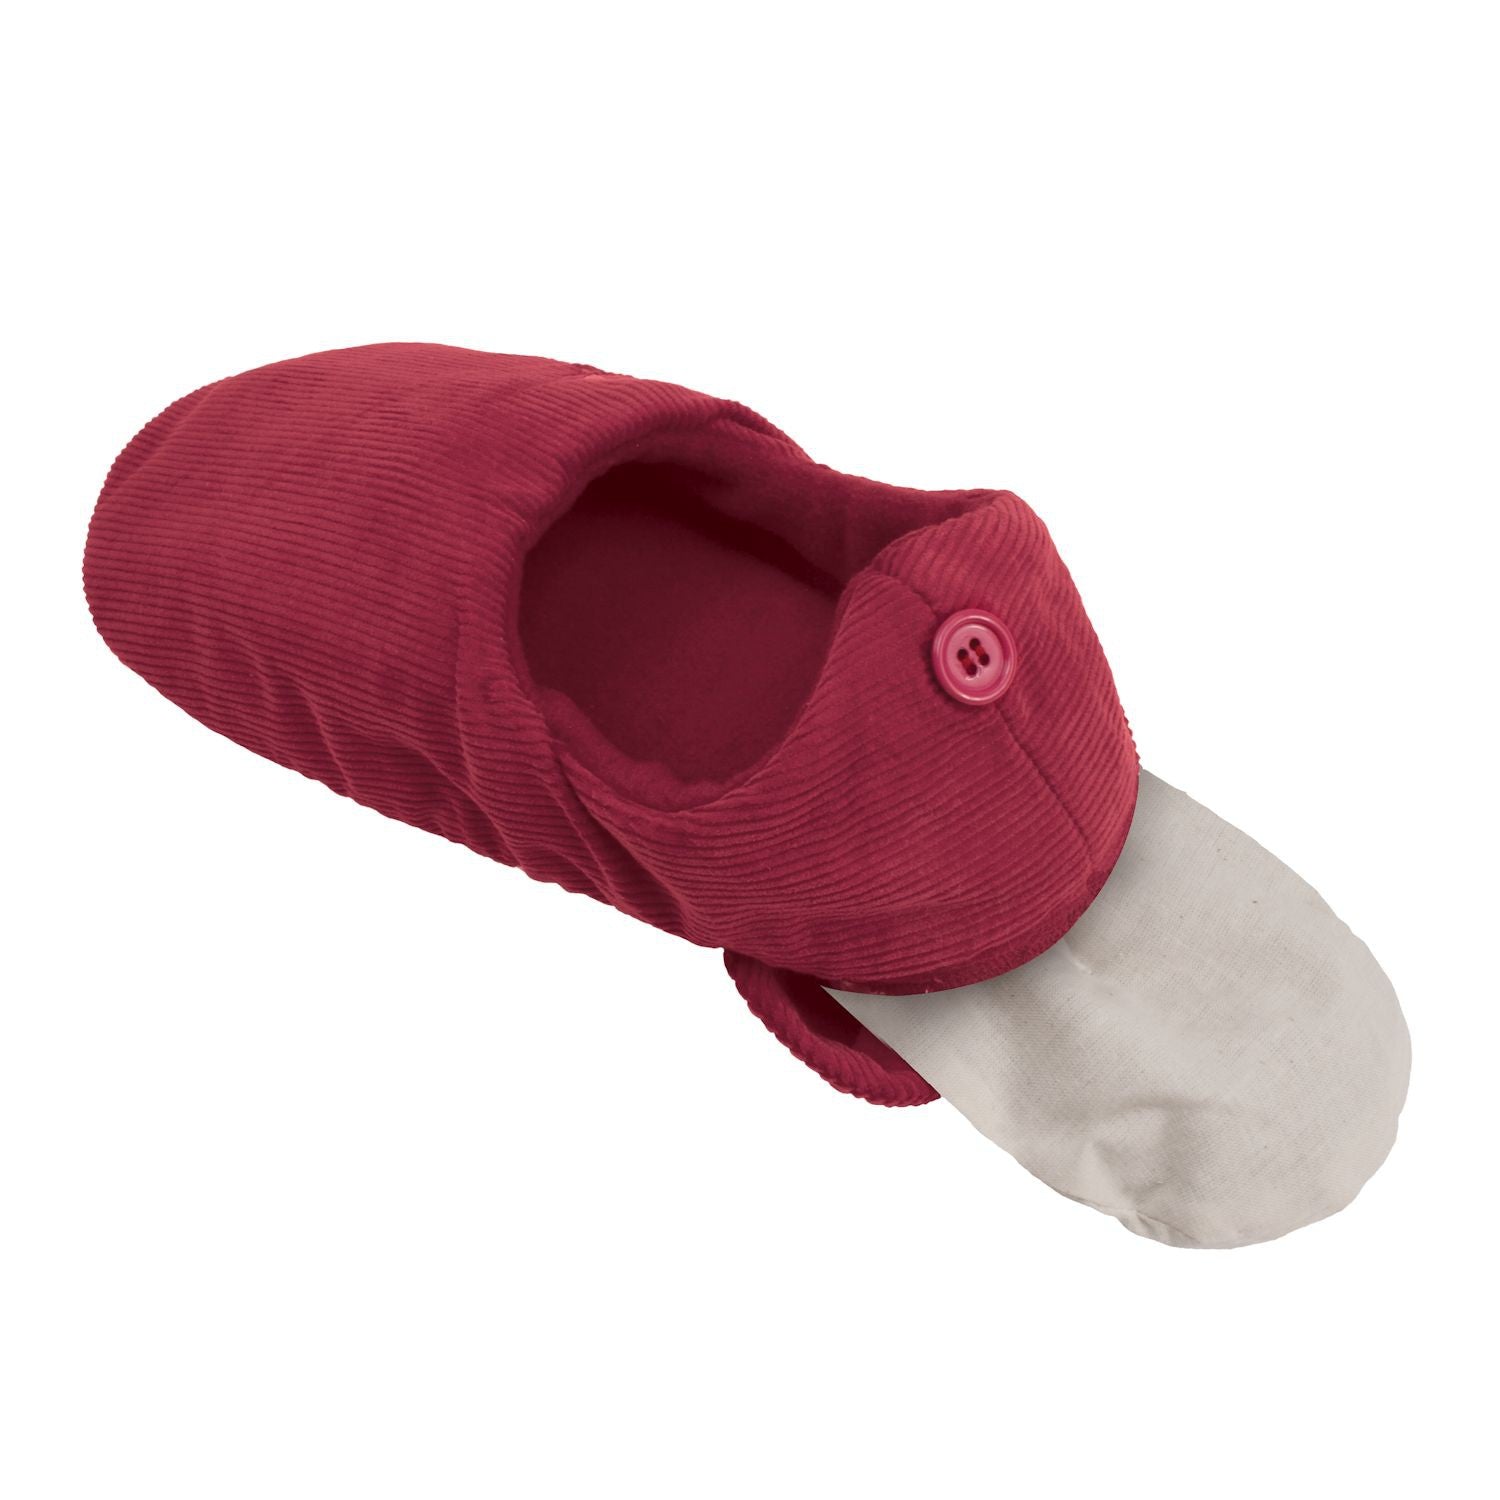 Aroma Home Microwavable Feet Warmers Cranberry Burgundy